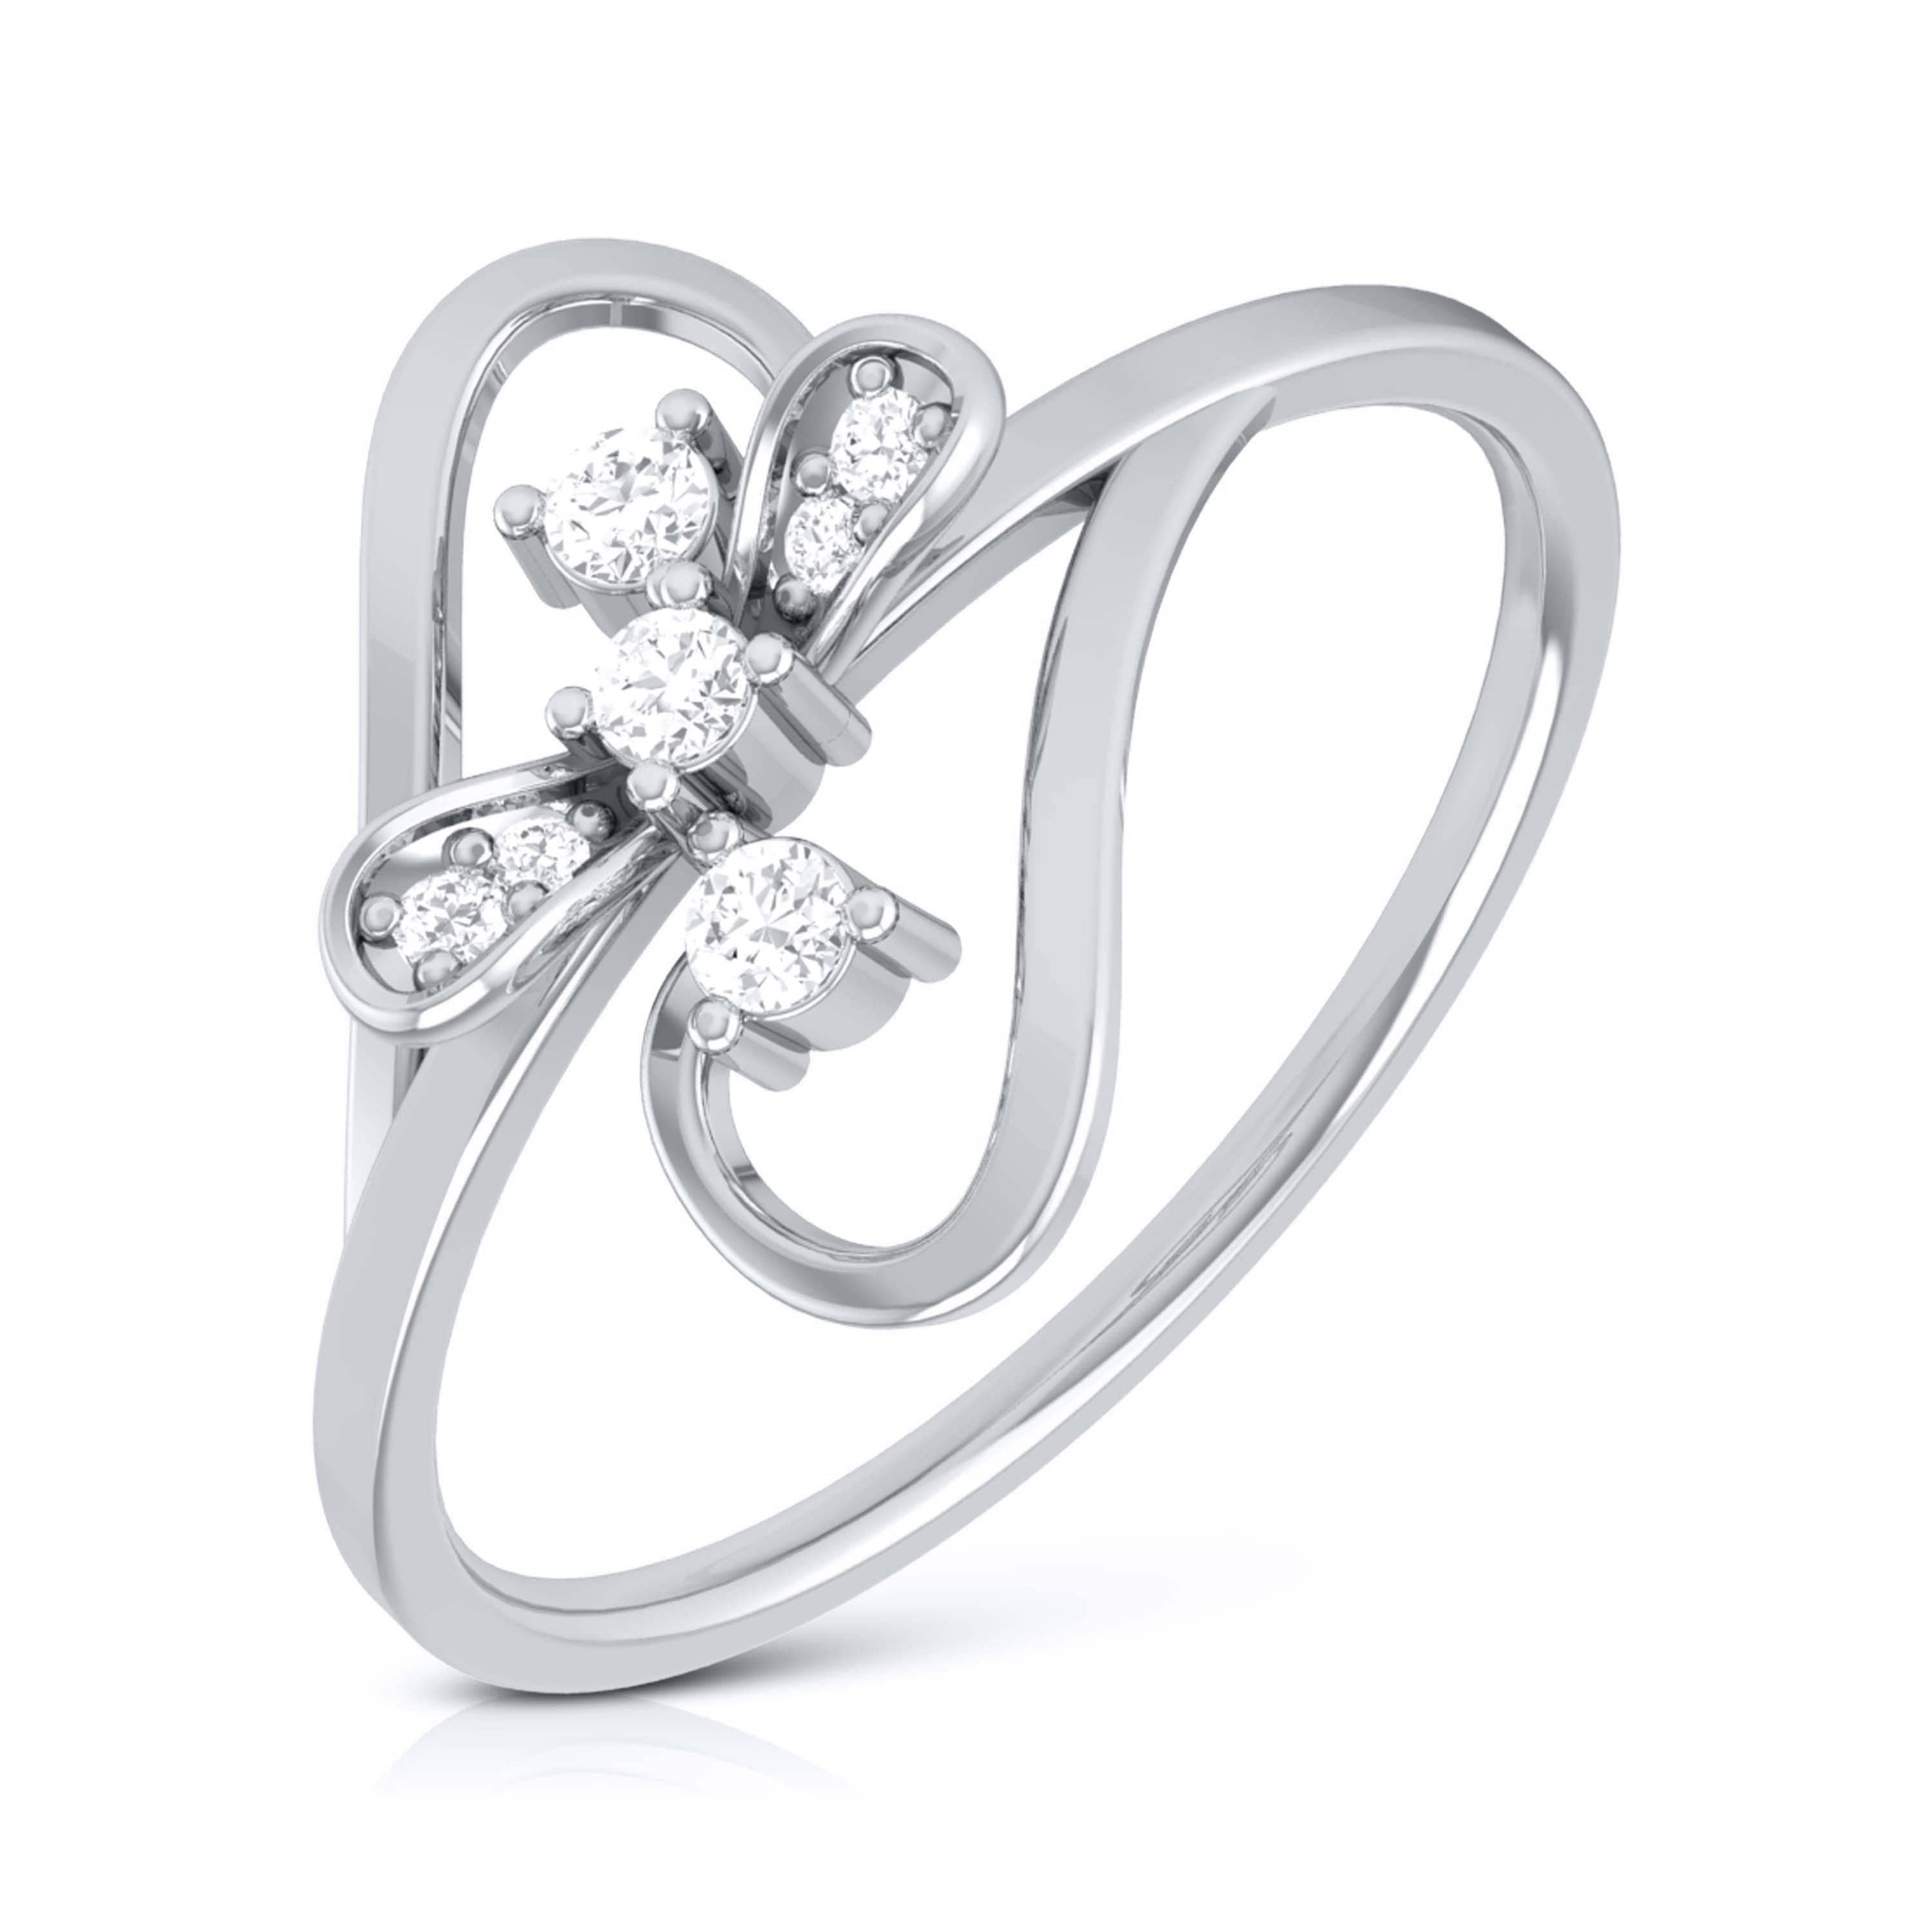 Kay Outlet | Kay Jewelers Outlet - Discount Jewelry